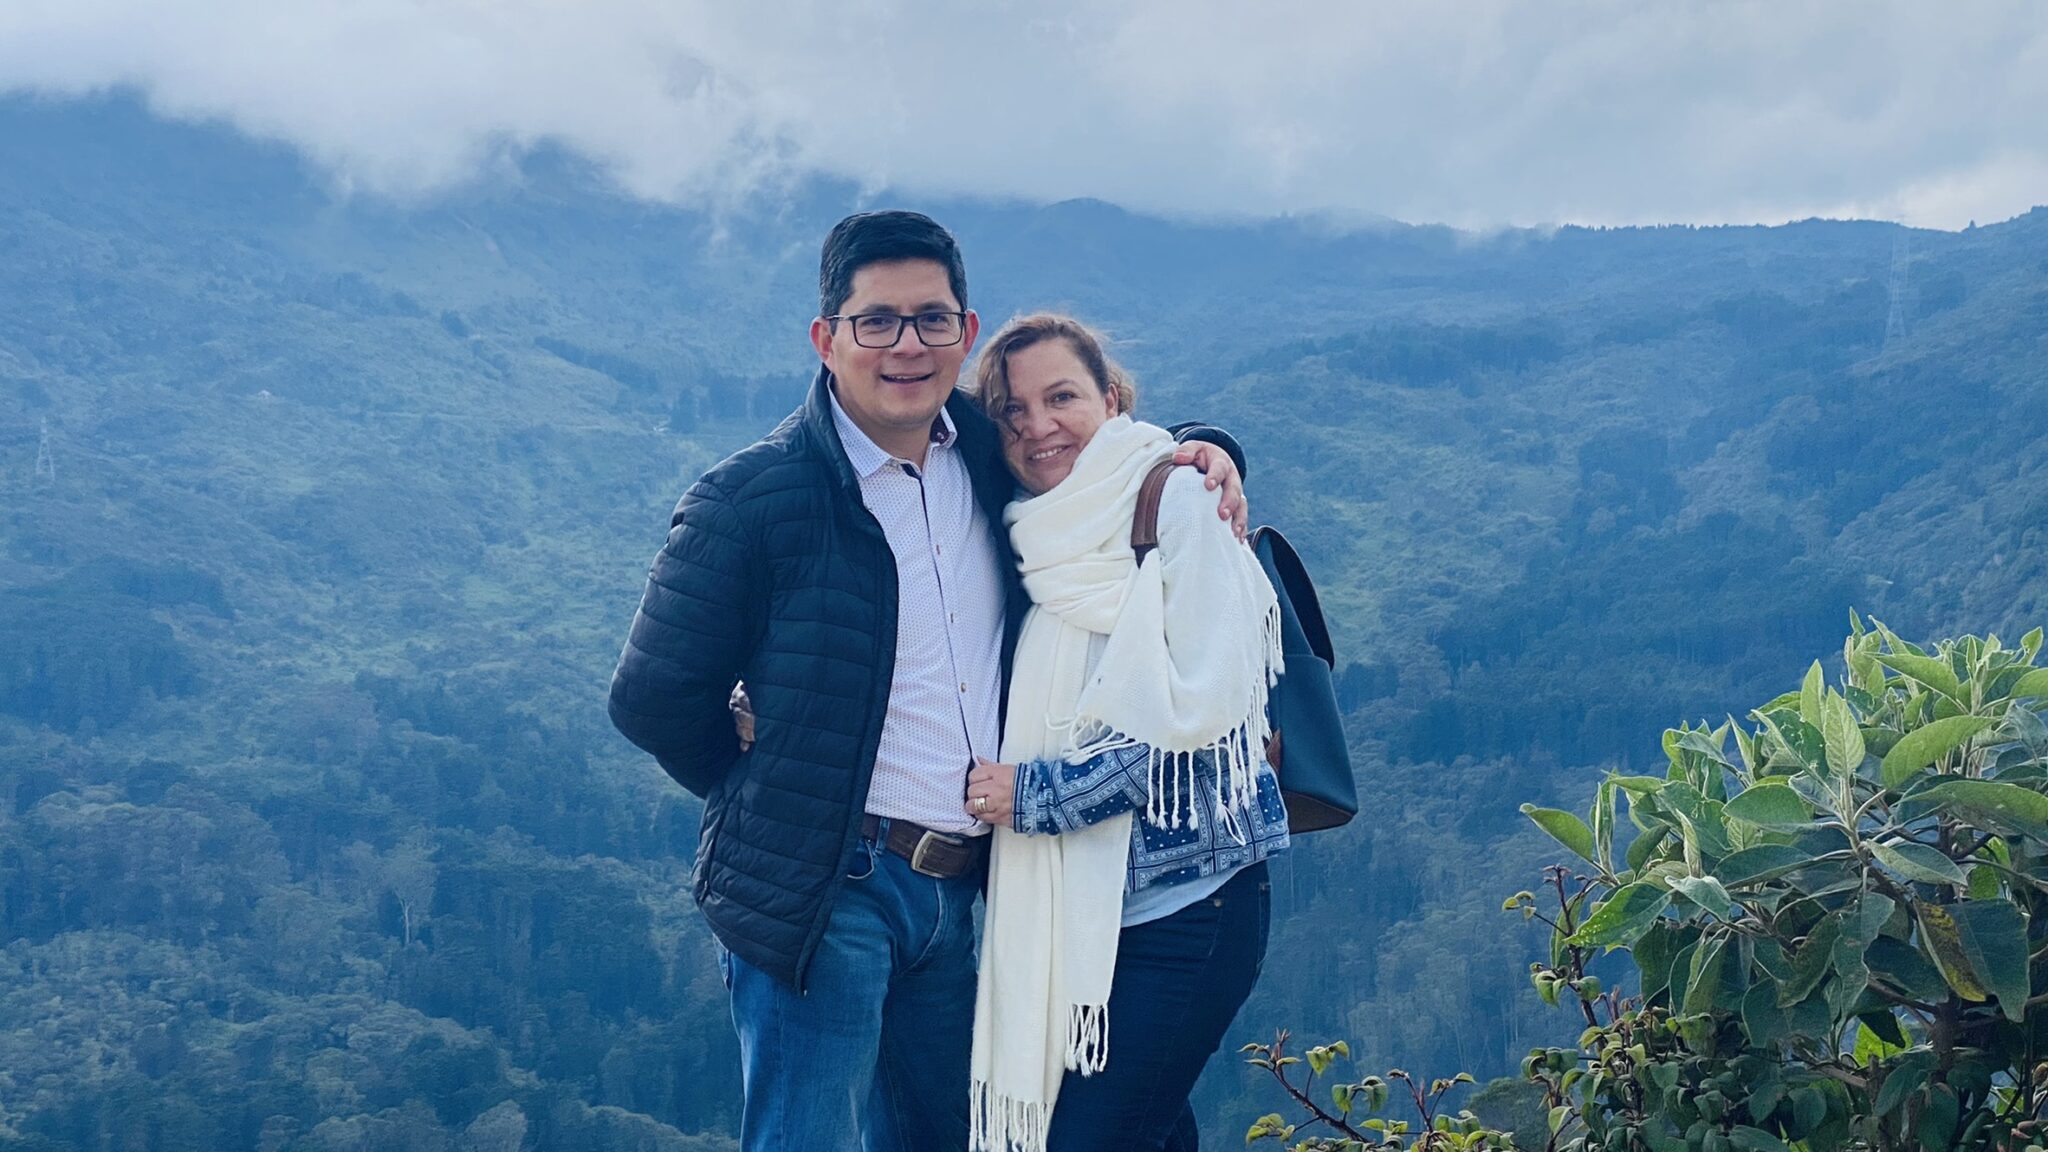 Dynamic Pastor Sparks Rapid Enrollment Growth in Colombia